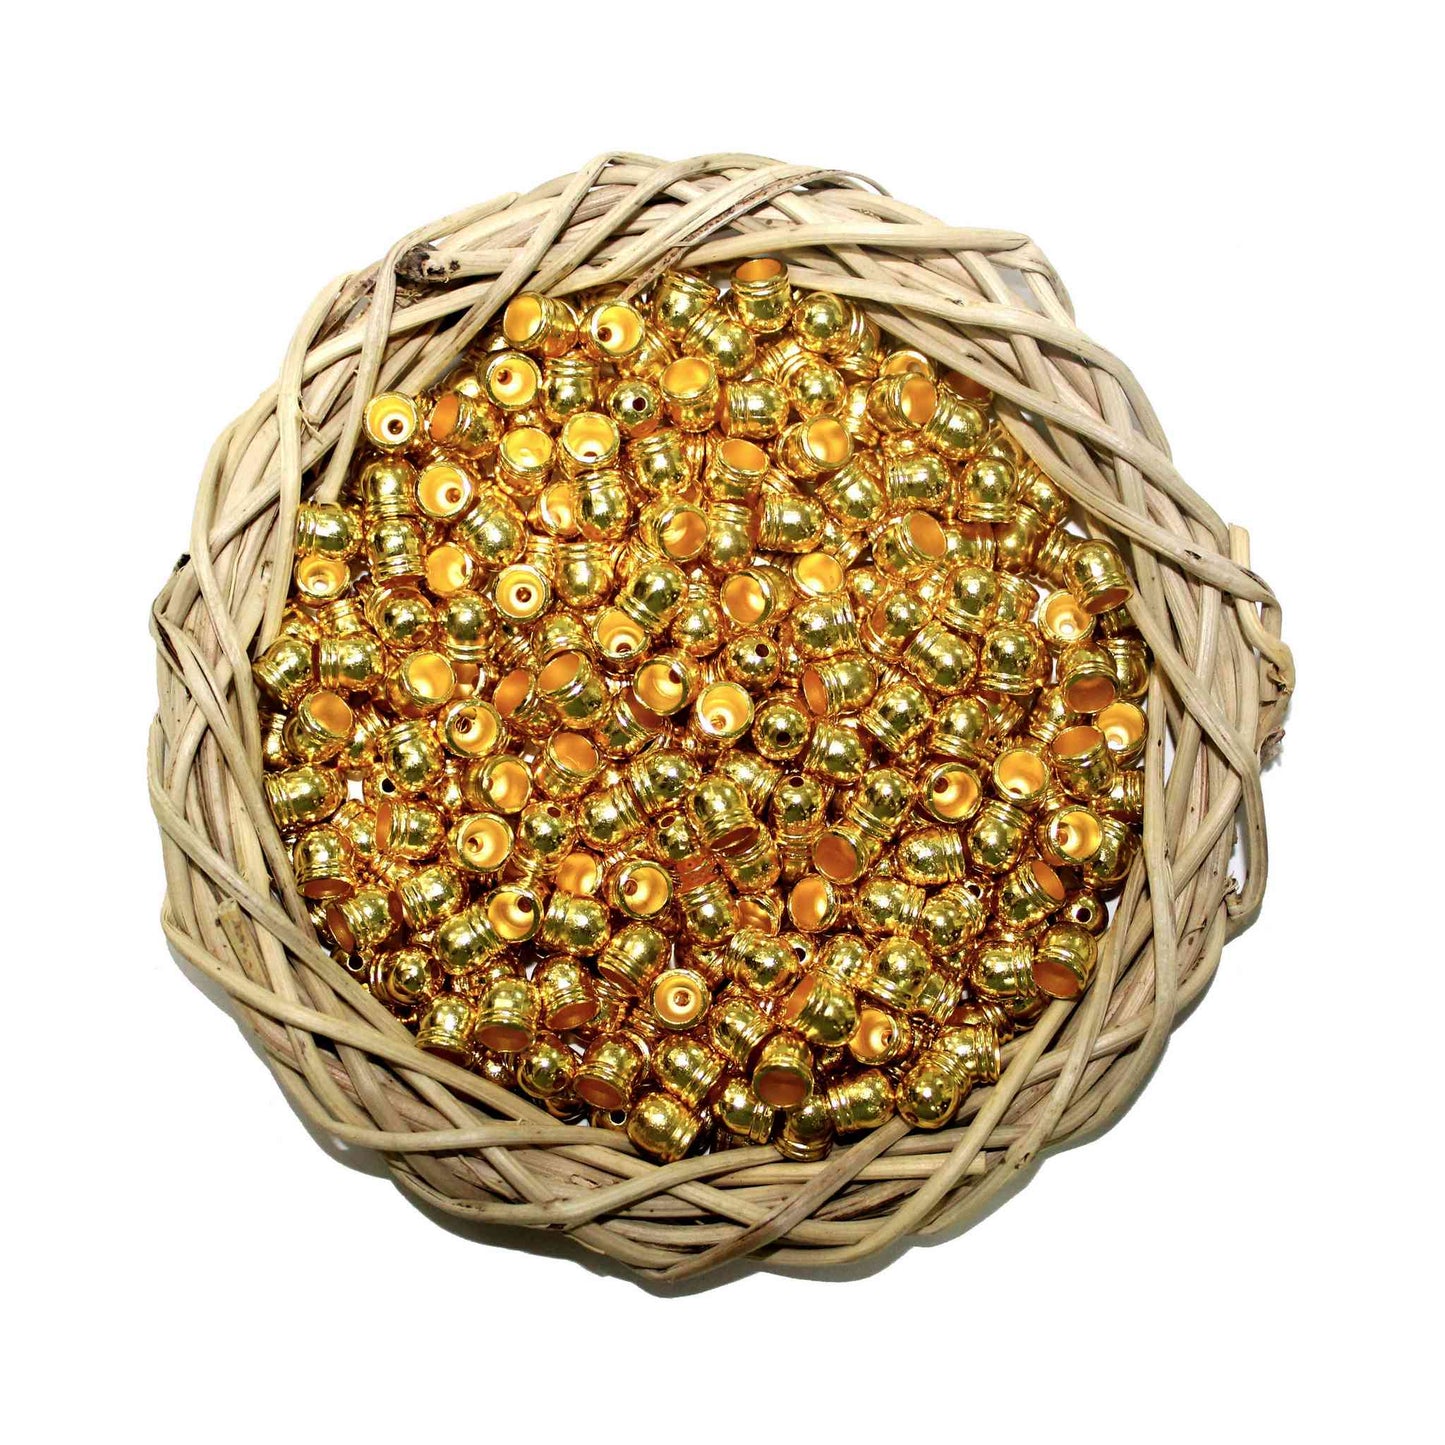 Indian Petals Premium quality Cap Bead for DIY Craft, Trousseau Packing or Decoration, Small - Indian Petals